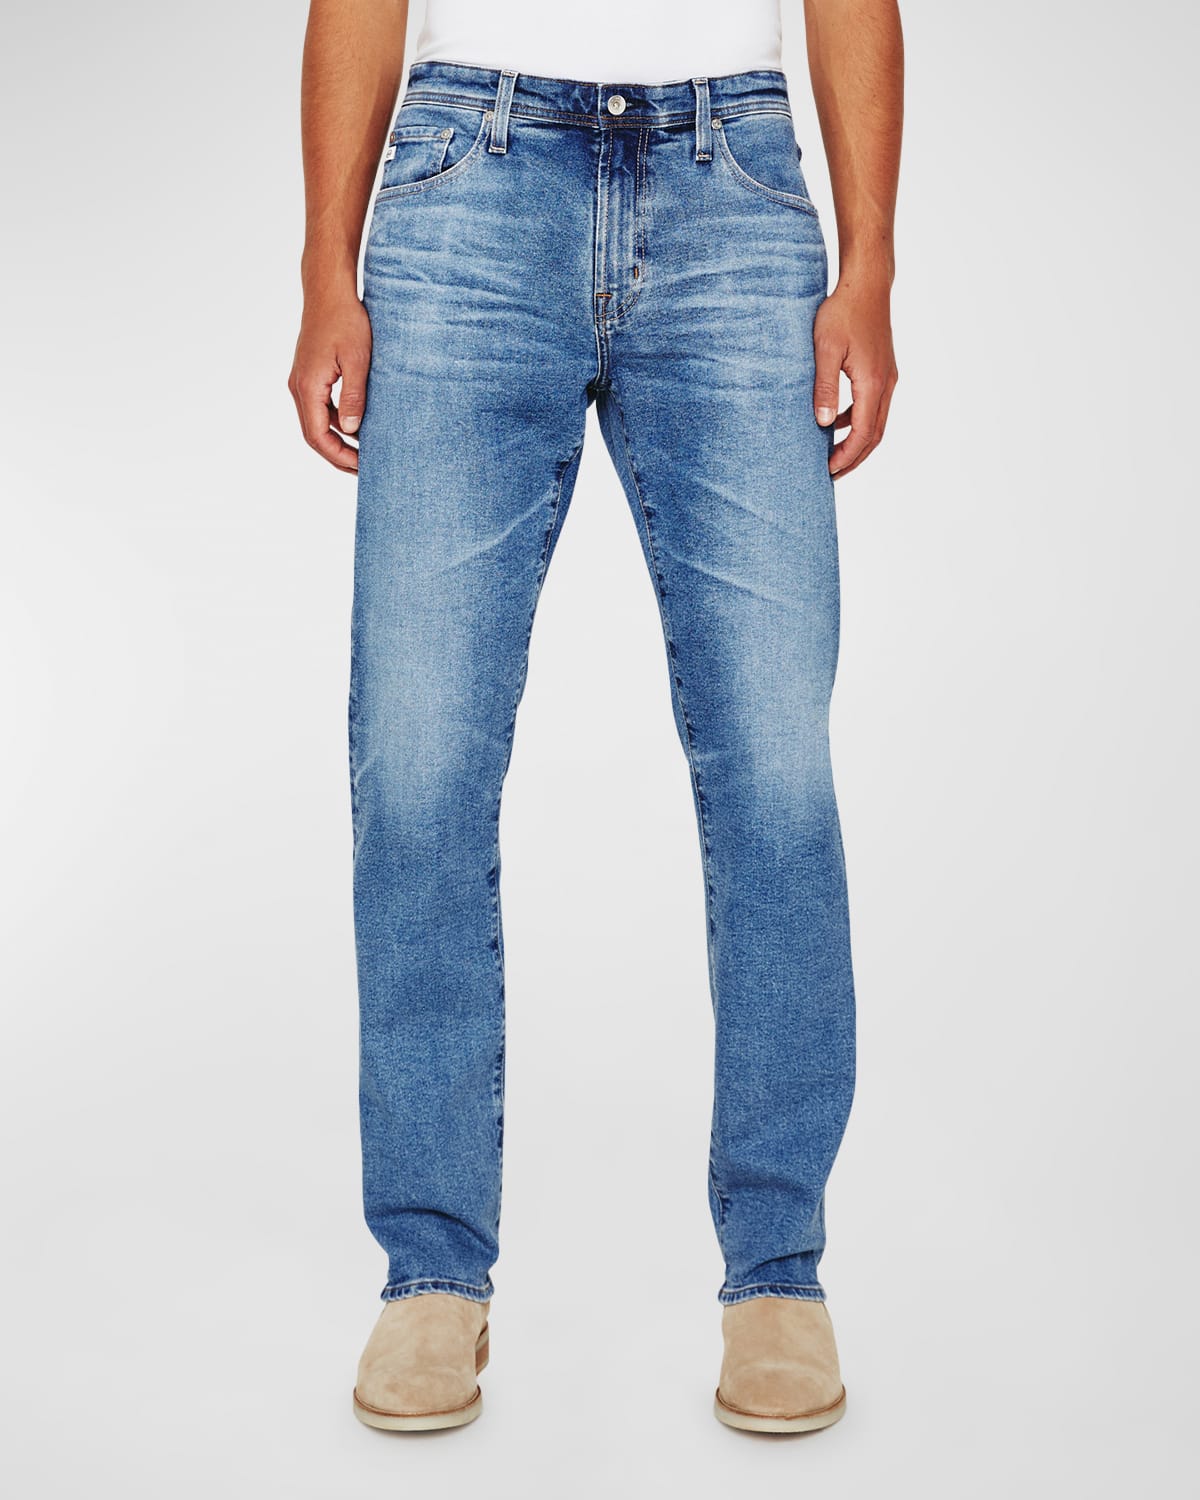 AG Adriano Goldschmied Men's Dylan Tapered Jeans